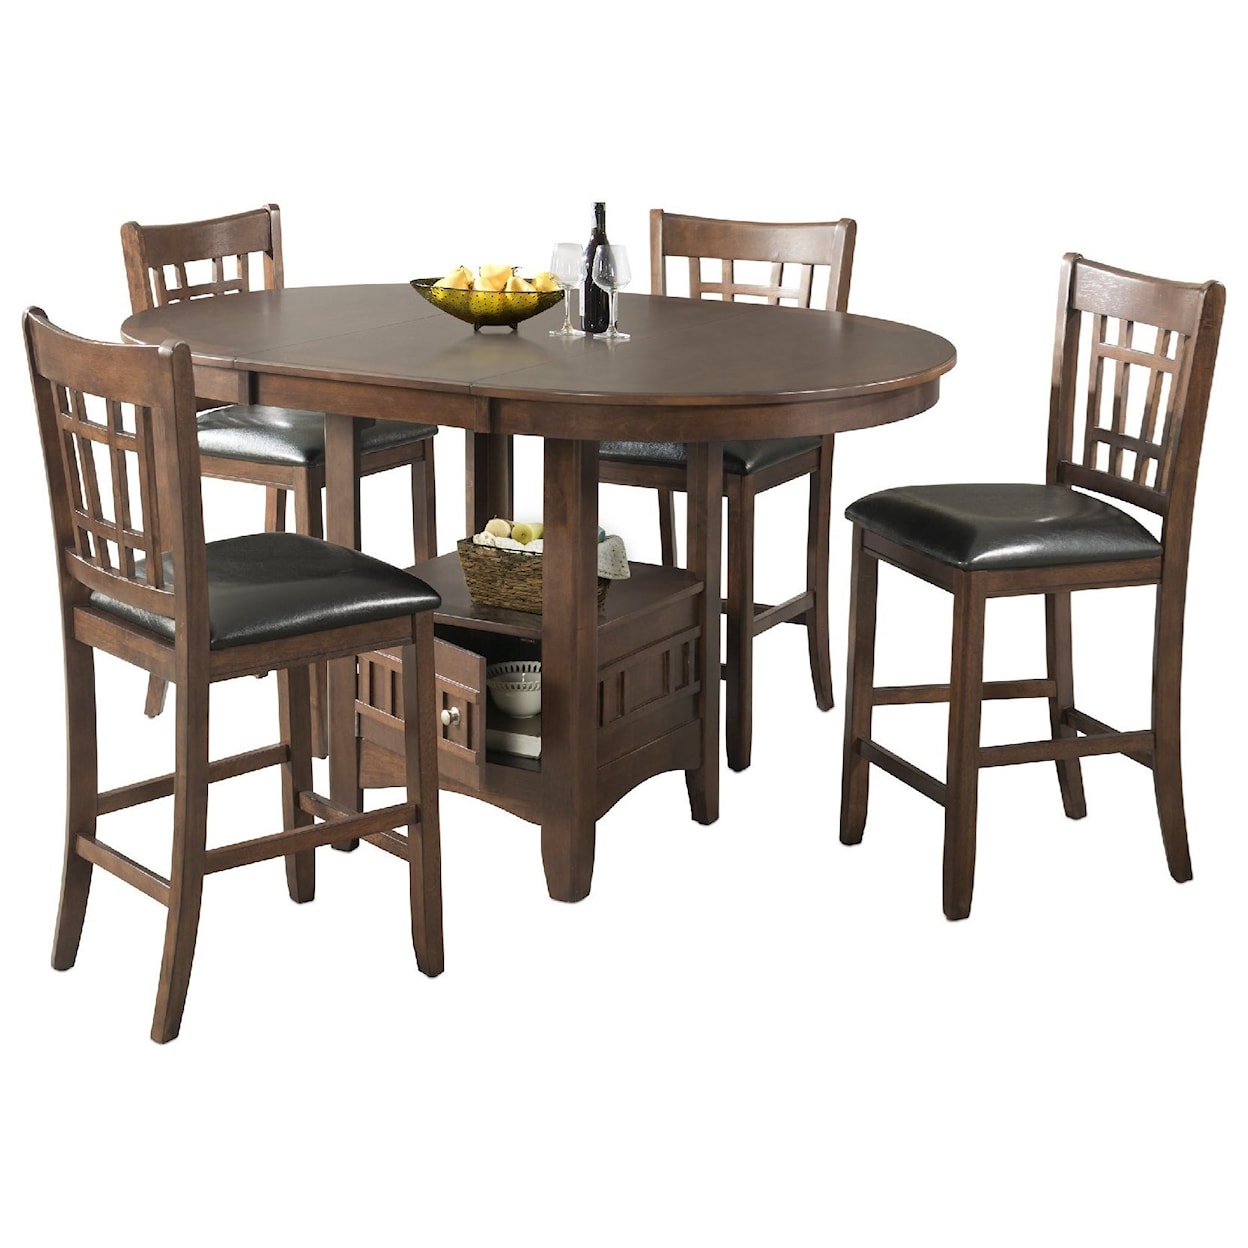 Elements International Max Counter Height Table Set